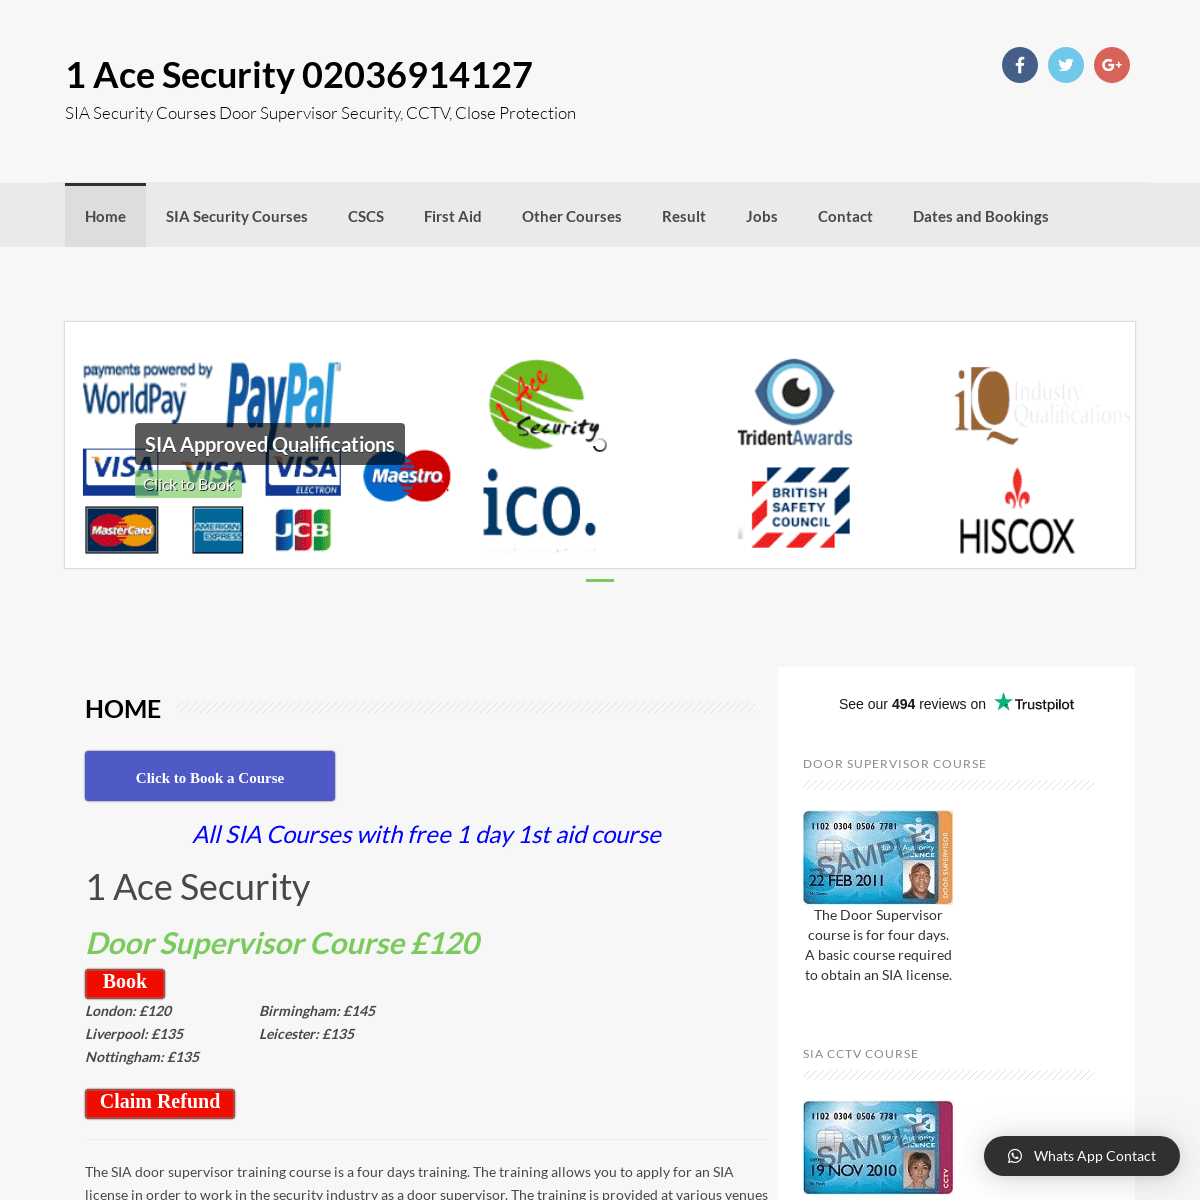 A complete backup of 1acesecurity.co.uk